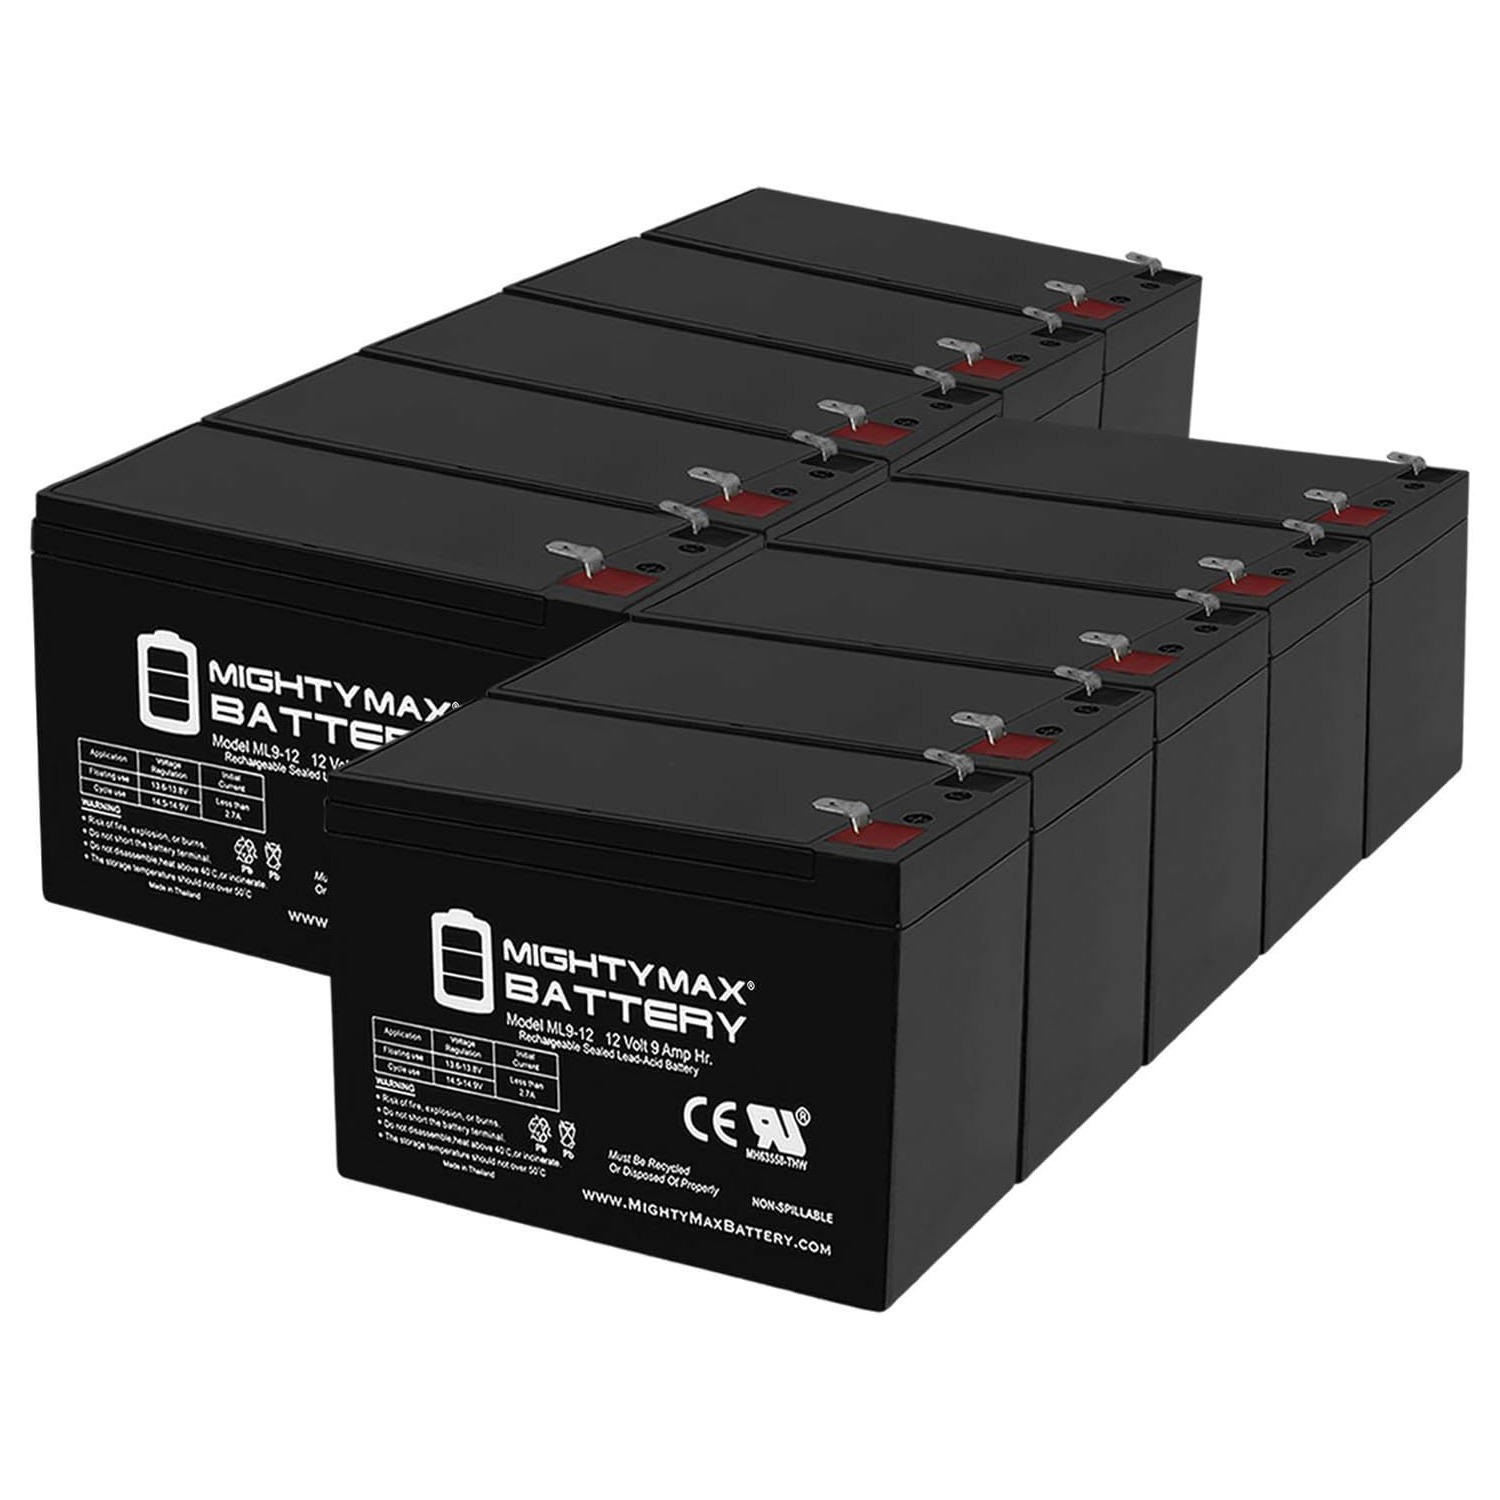 Altronix SMP3PMCTXPD8 12V, 9Ah Lead Acid Battery - 10 Pack